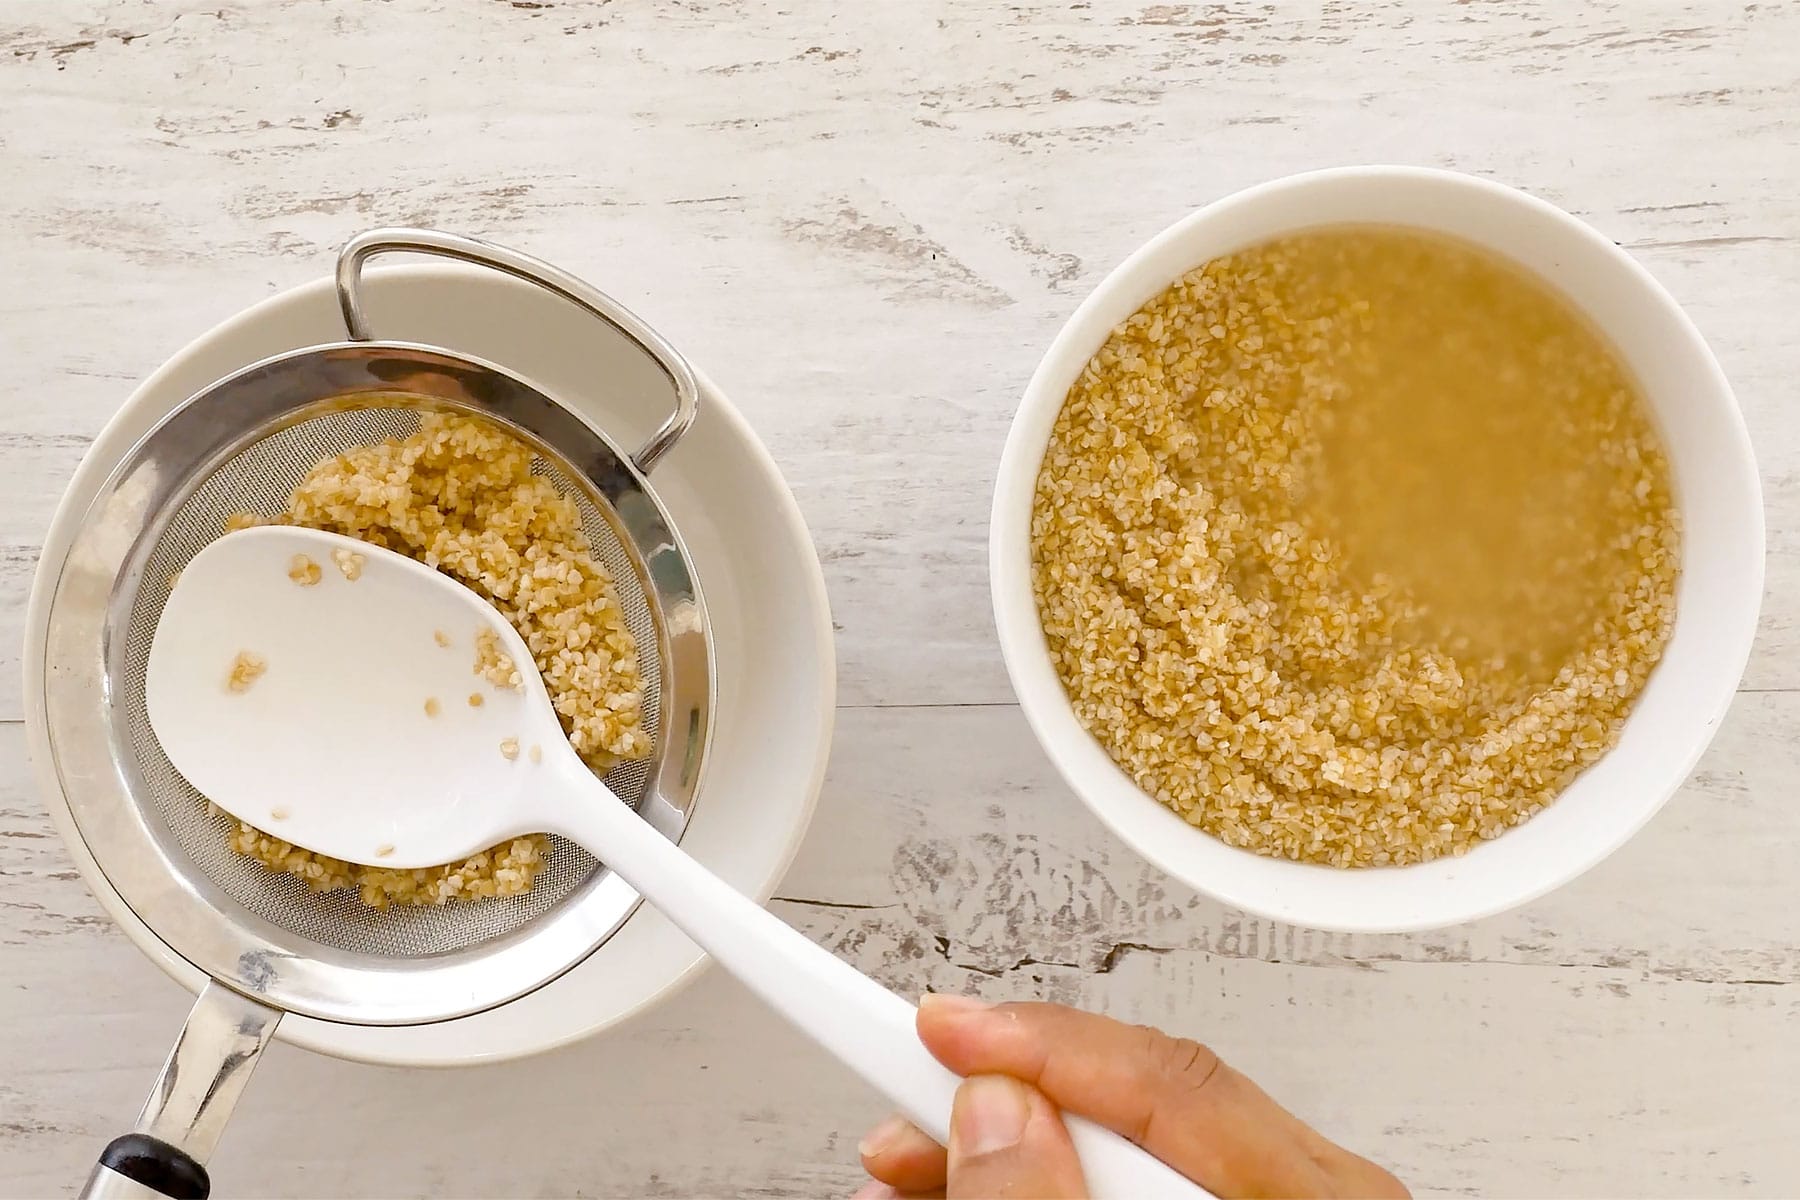 Removing bulgur from water using a fine sieve